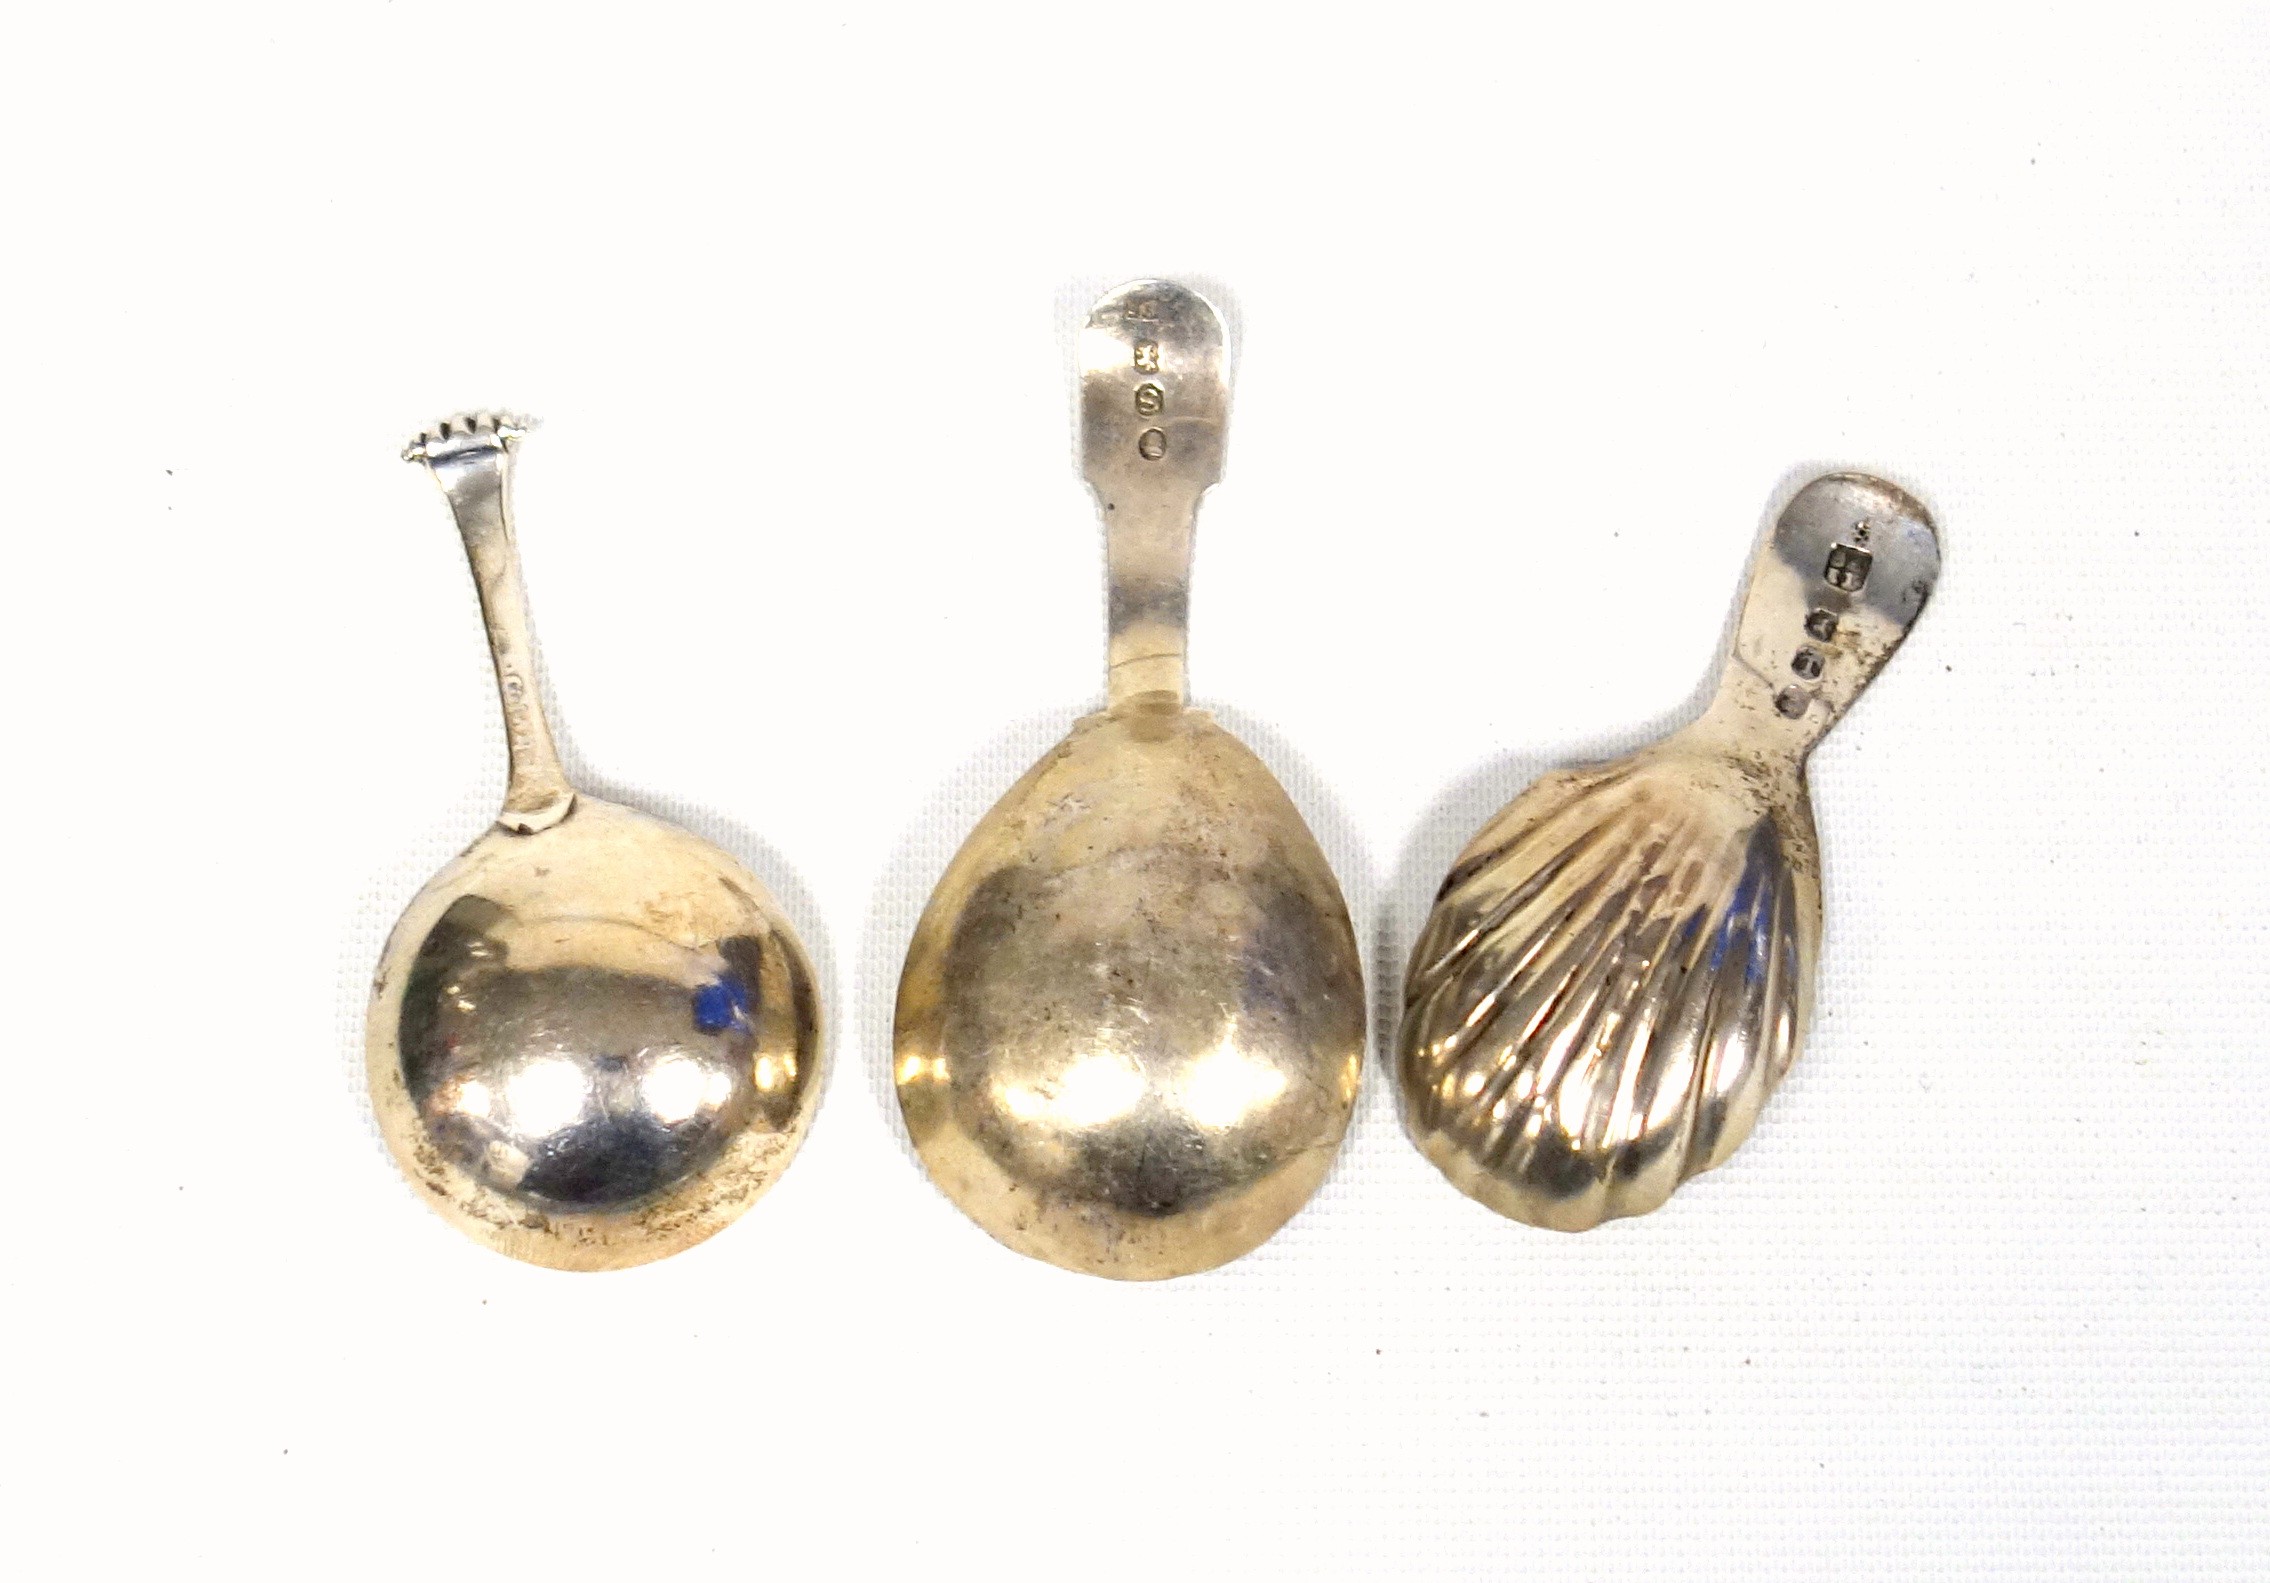 George III silver Fiddle Pattern caddy spoon, by J S, London, 1813, caddy spoon with shell bowl, - Image 2 of 4